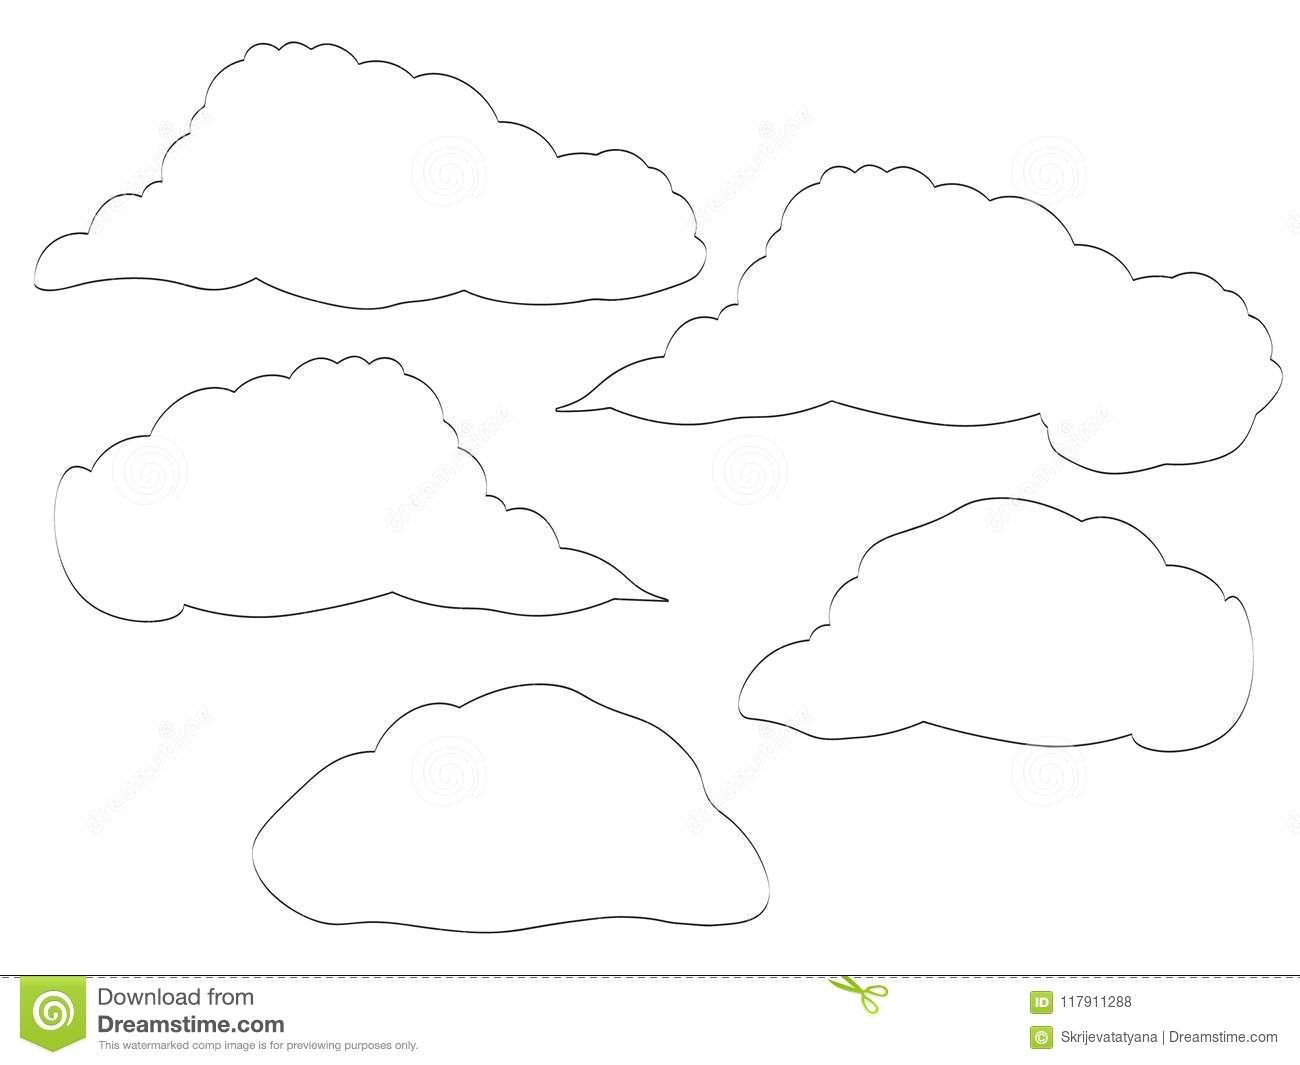 Simple Line Drawings Of Hands Hand Drawn Set Of Outline Clouds Stock Vector Illustration Of